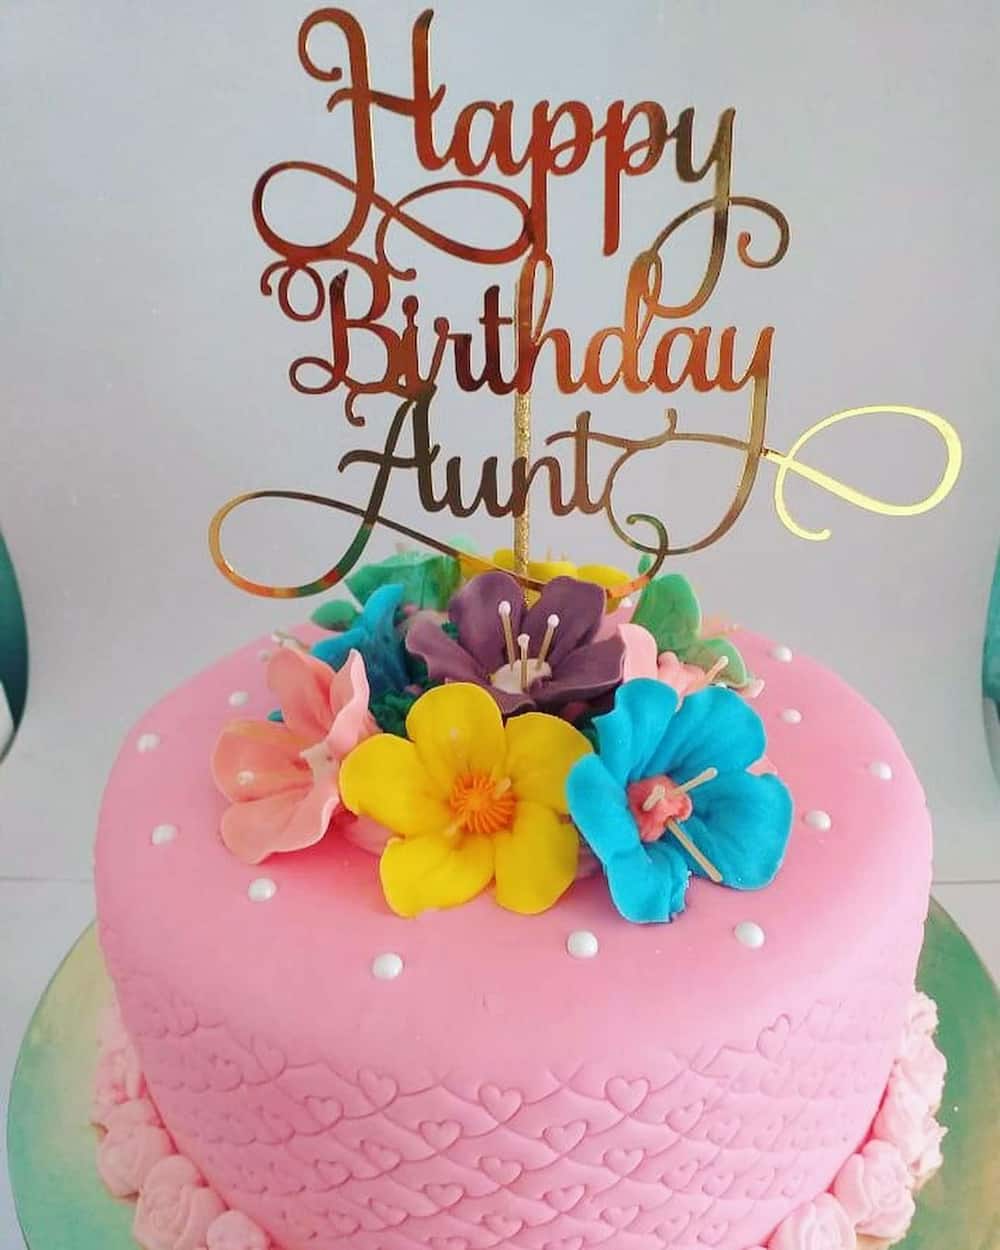 Special happy birthday aunty messages